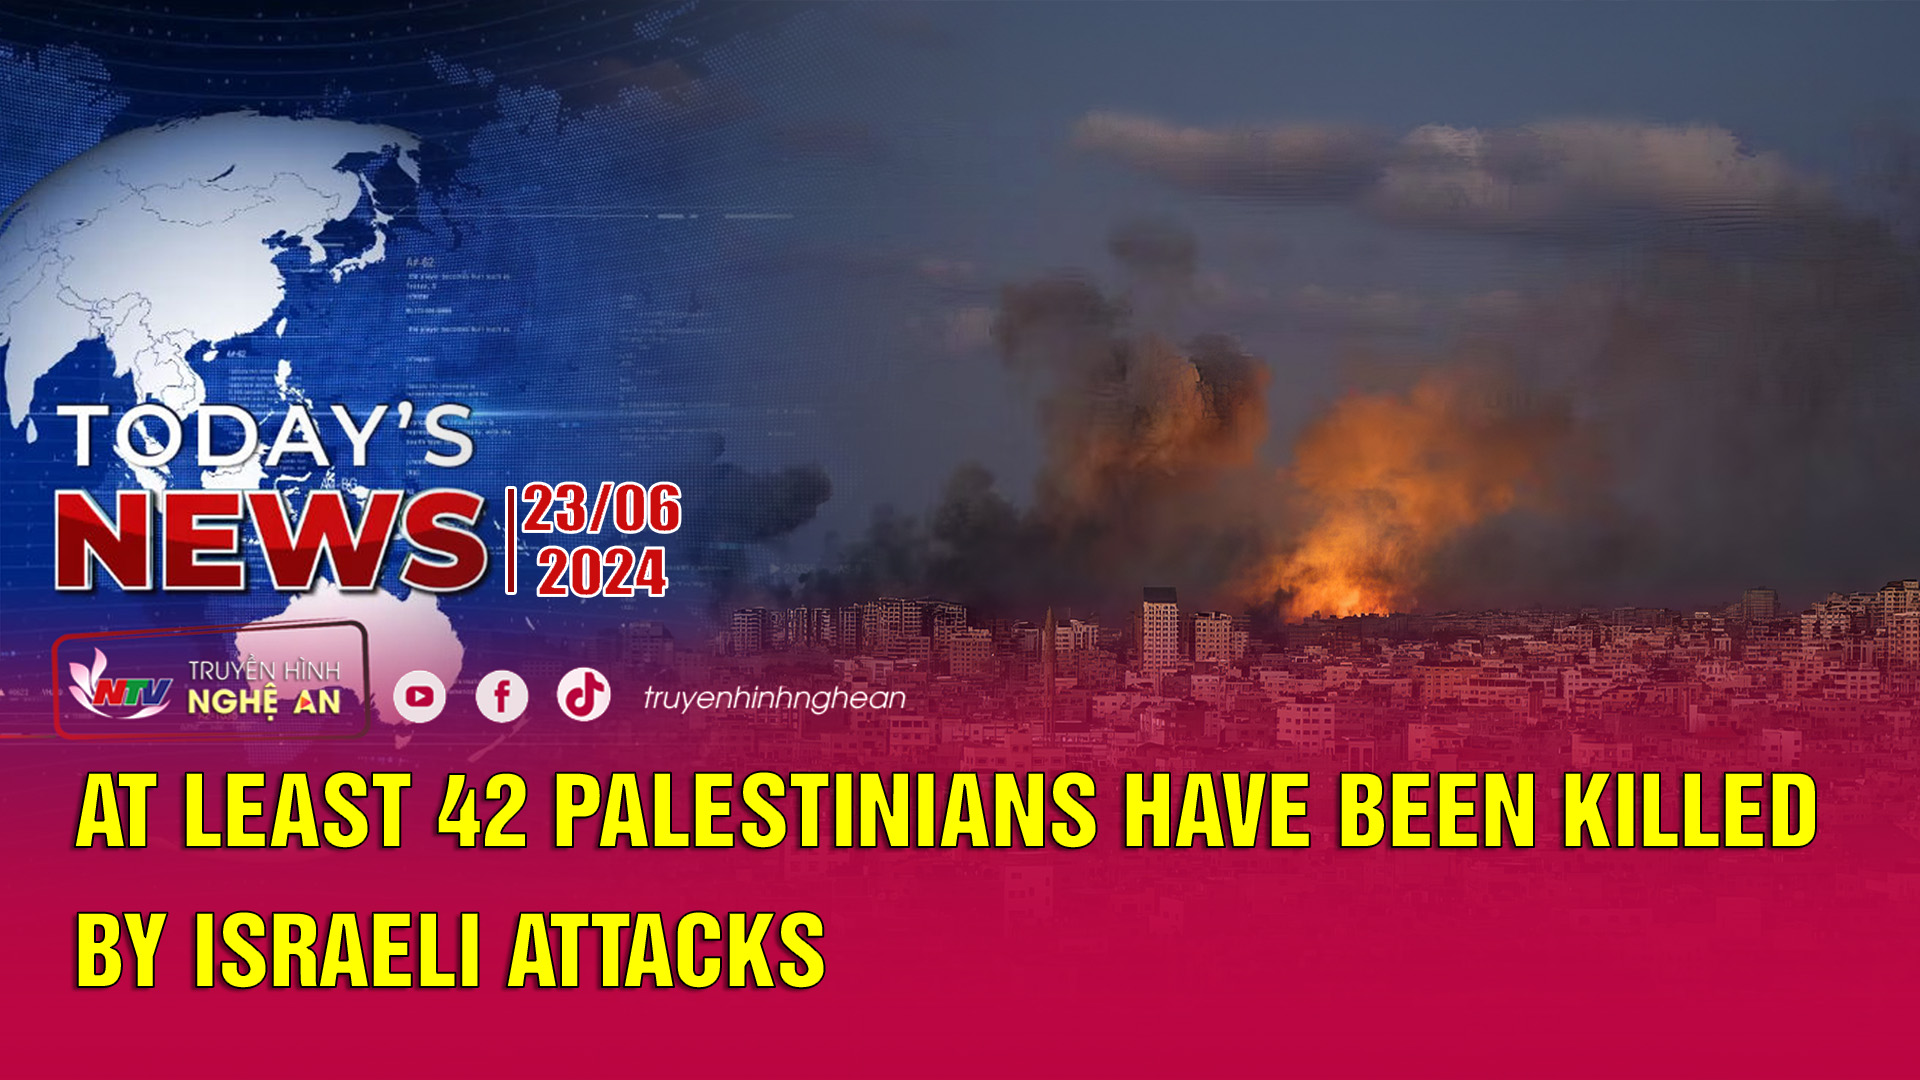 Today's News 23/06/2024: At least 42 Palestinians have been killed by Israeli attacks